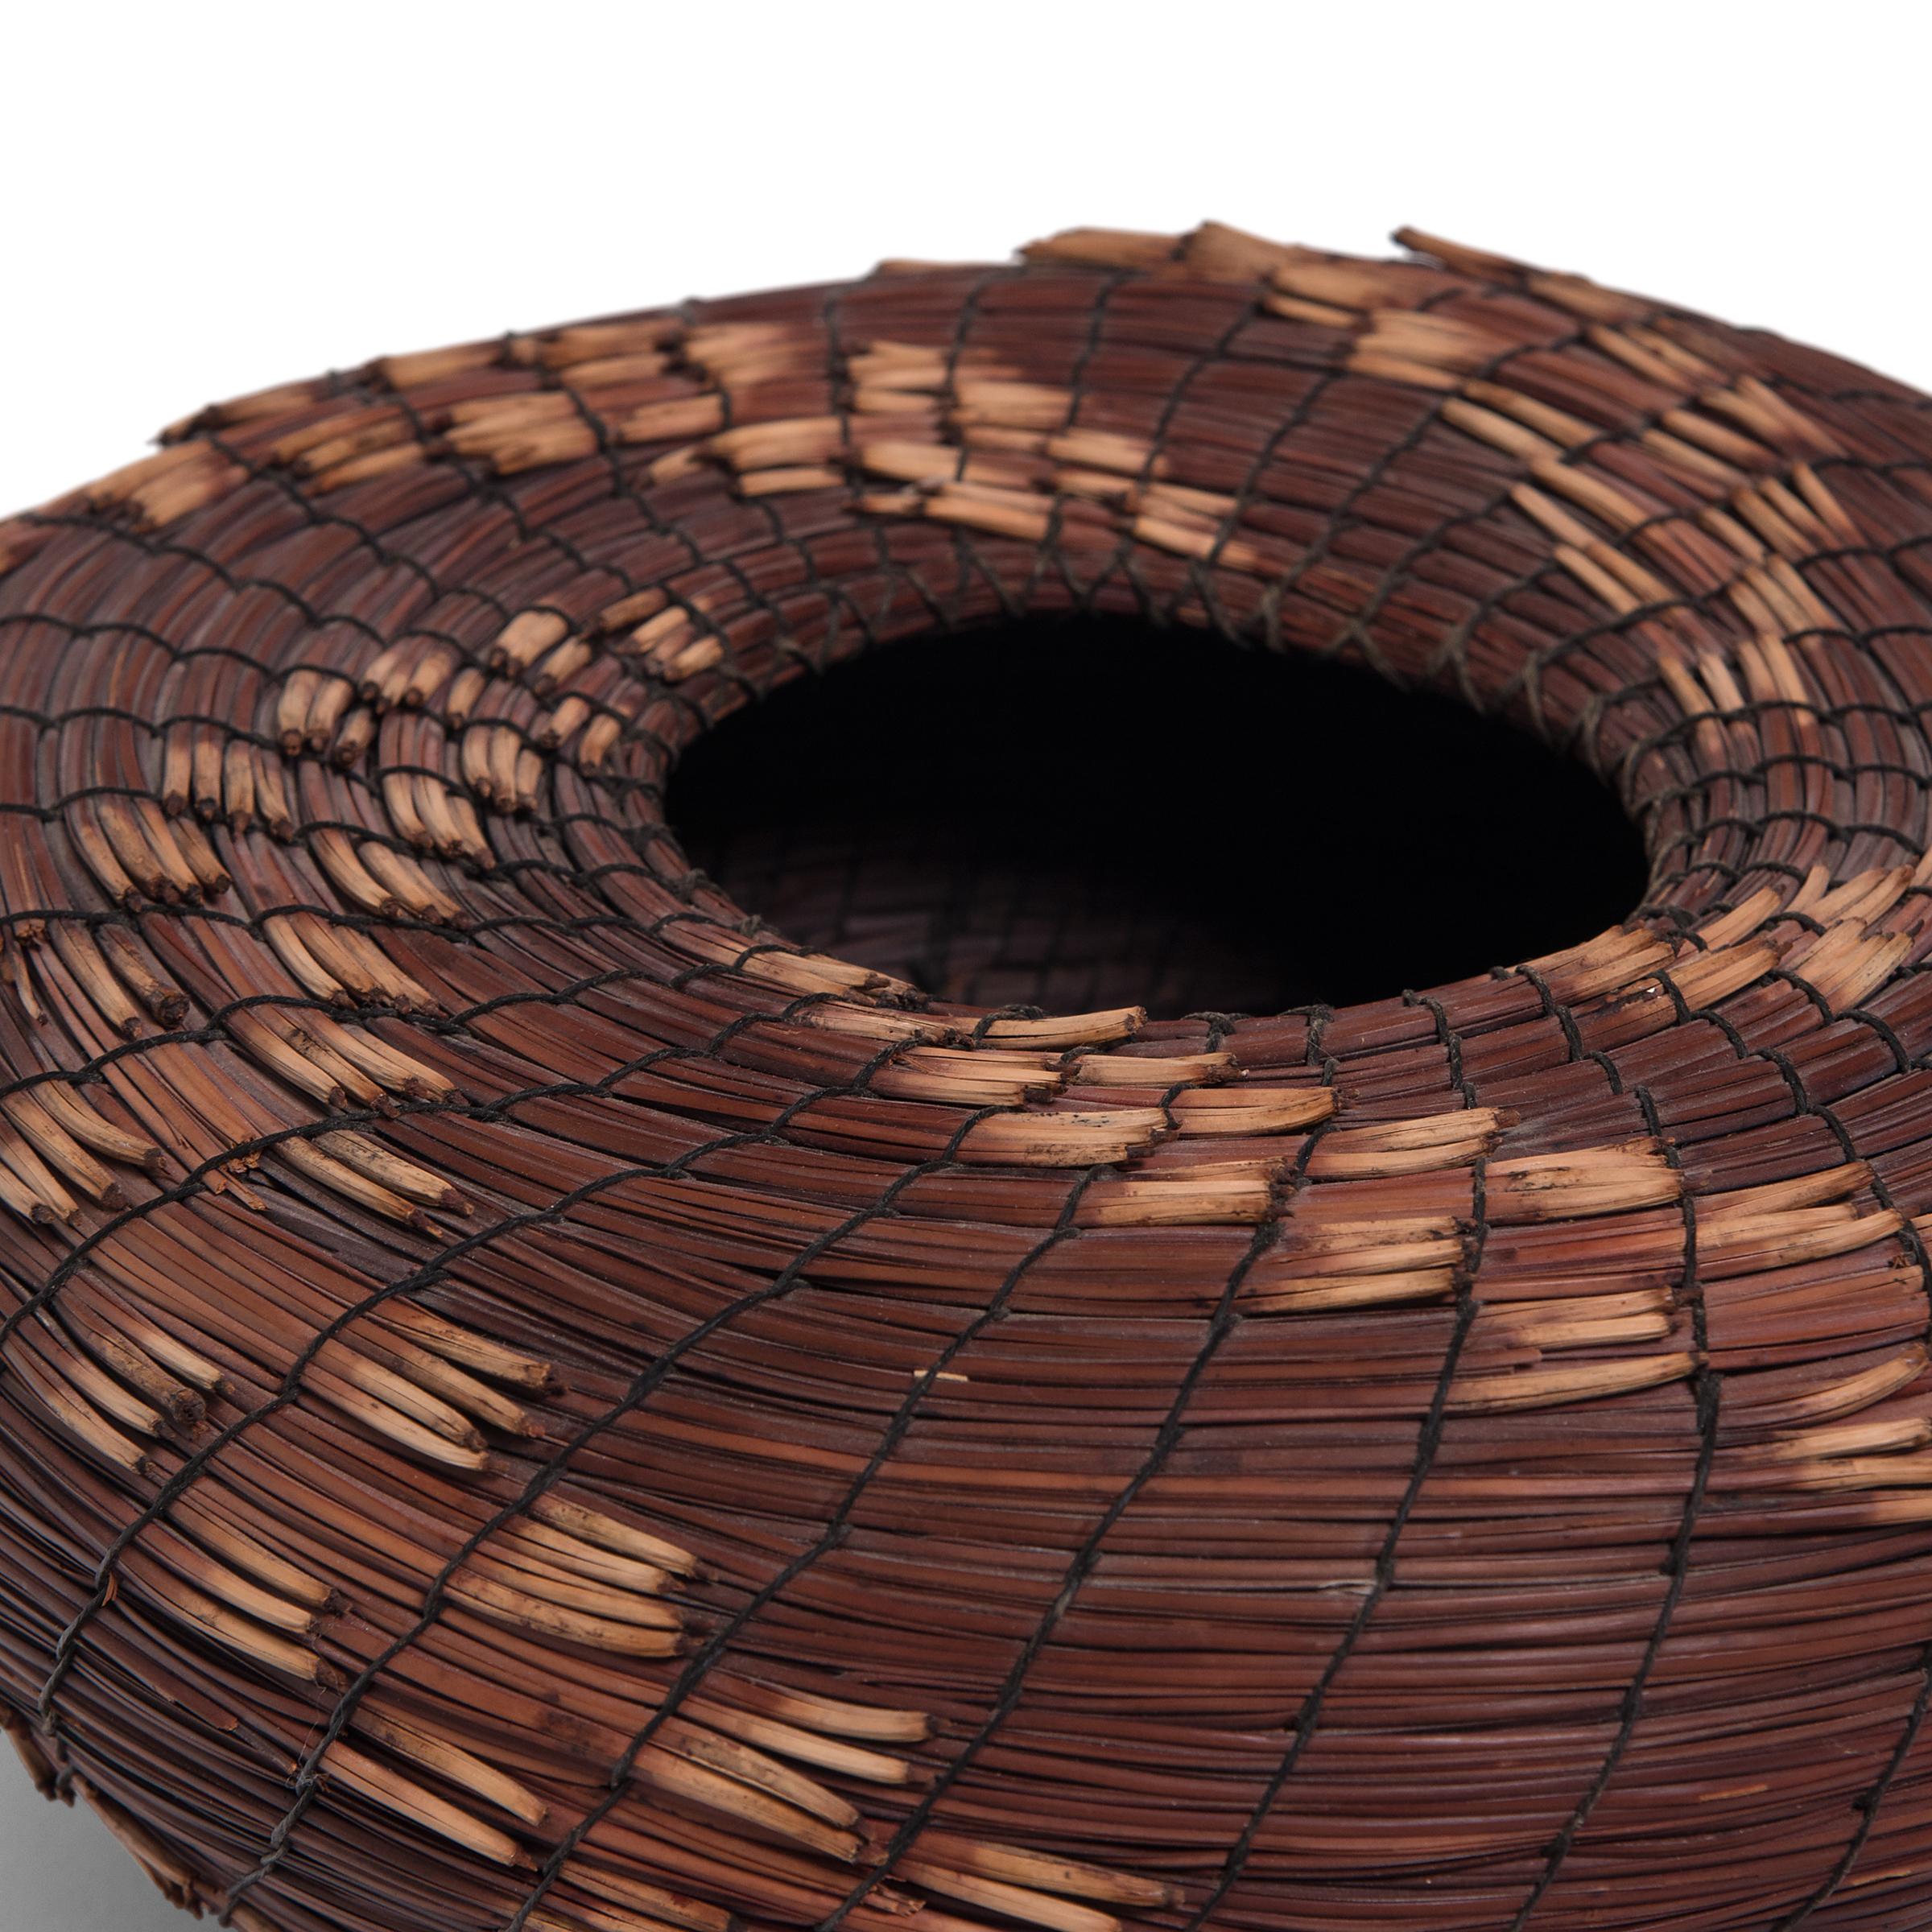 American Torrey Pine Needle Spiral Basket by Fran and Neil Prince